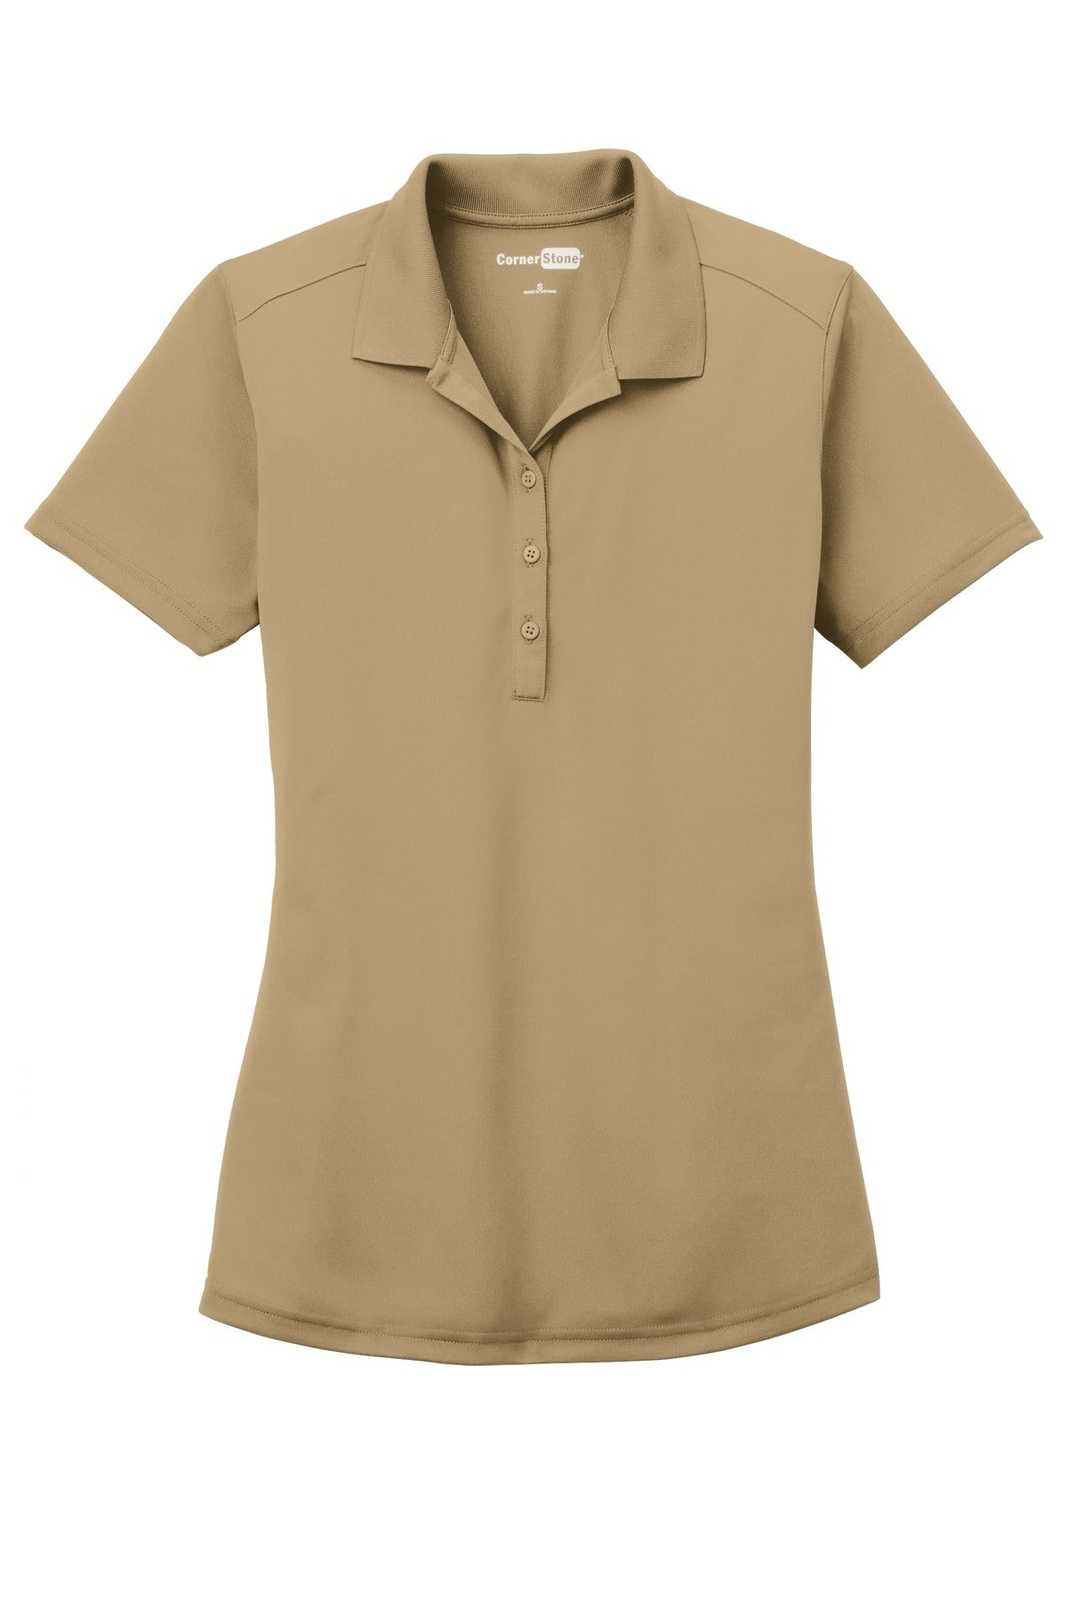 CornerStone CS419 Ladies Select Lightweight Snag-Proof Polo - Tan - HIT a Double - 5